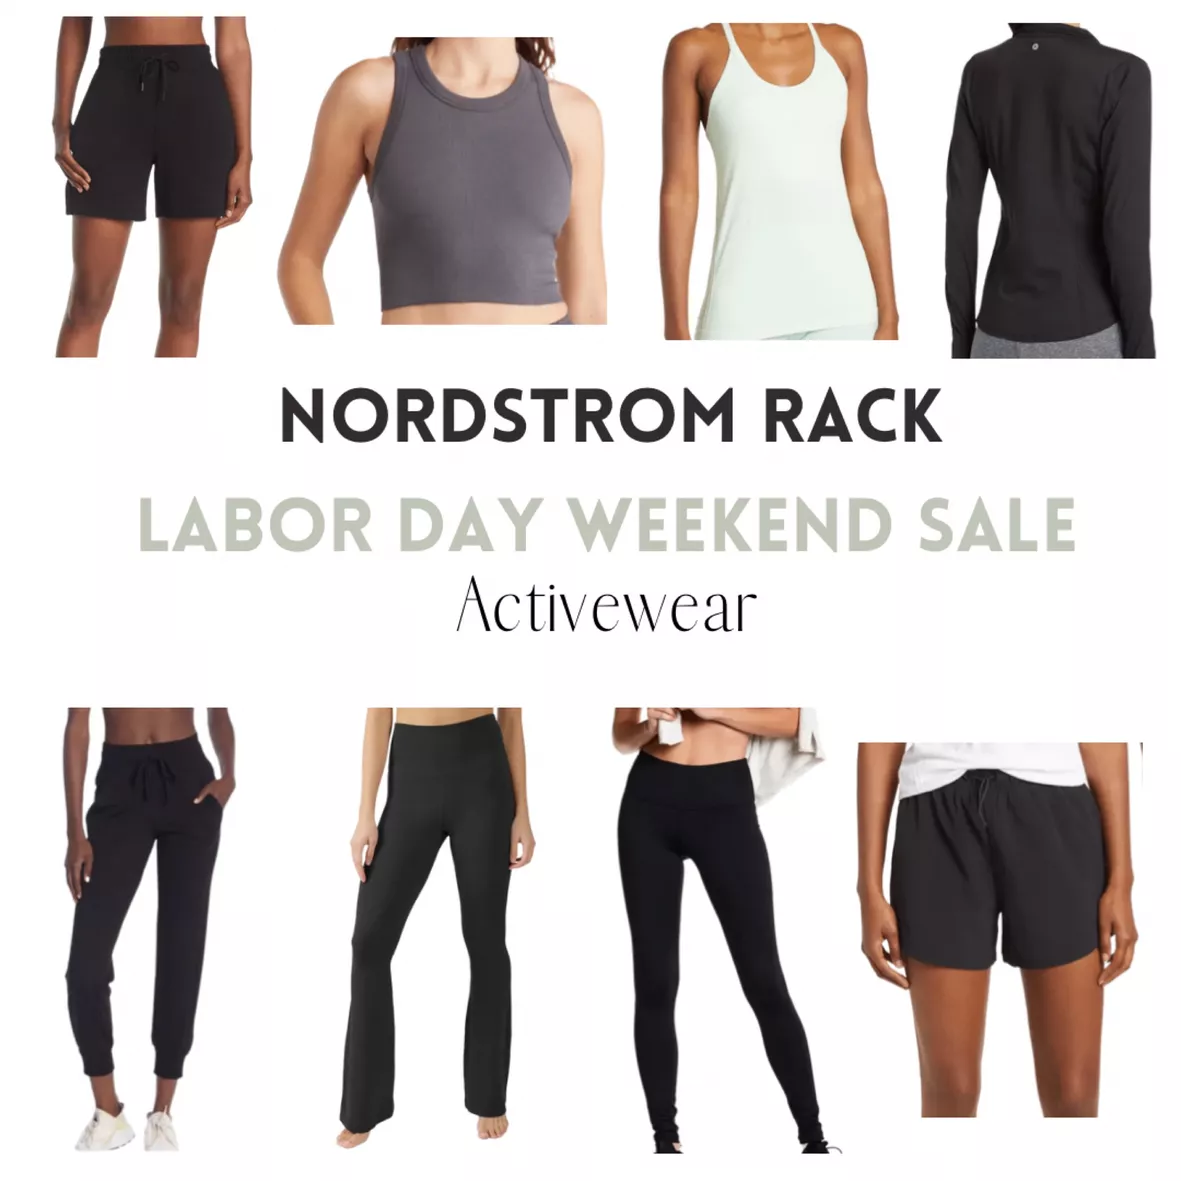 The Best Z By Zella Activewear To Buy From Nordstrom Rack's Sale